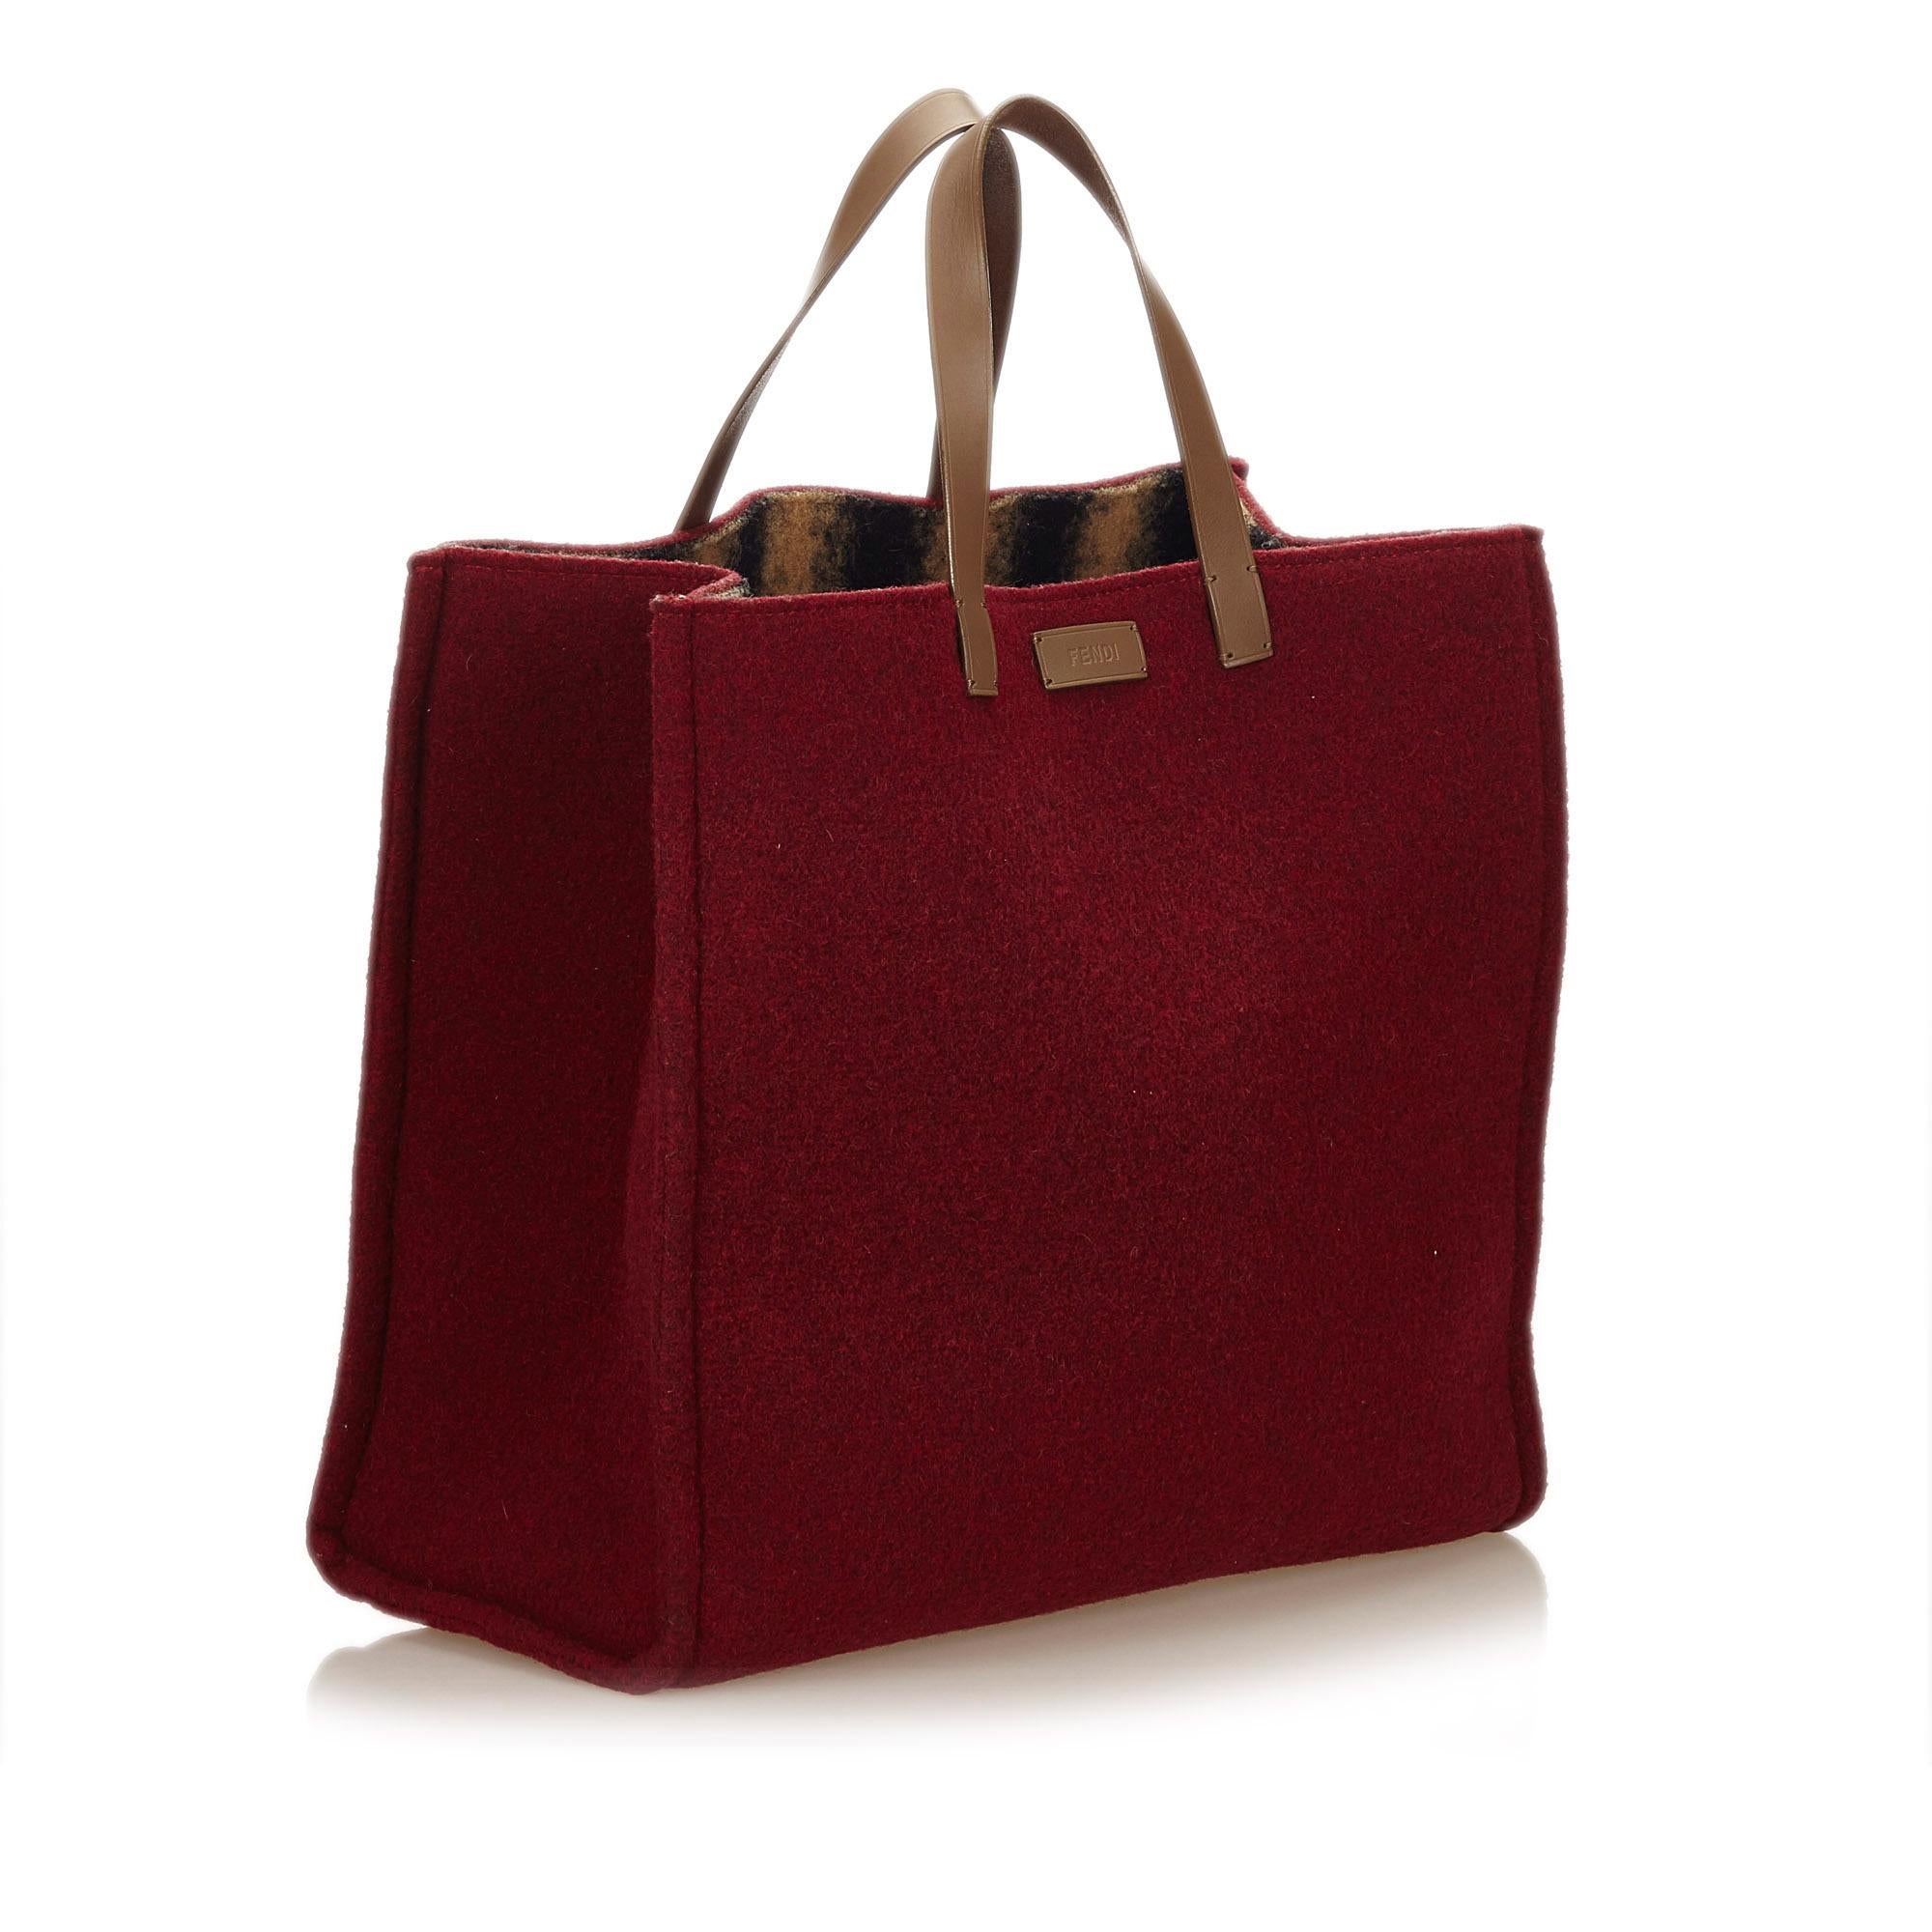 This tote bag features a wool body, flat leather handles, and an open top. It carries as AB condition rating.

Inclusions: 
Dust Bag

Dimensions:
Length: 34.00 cm
Width: 39.00 cm
Depth: 18.00 cm
Shoulder Drop: 16.00 cm

Material: Fabric x Wool x